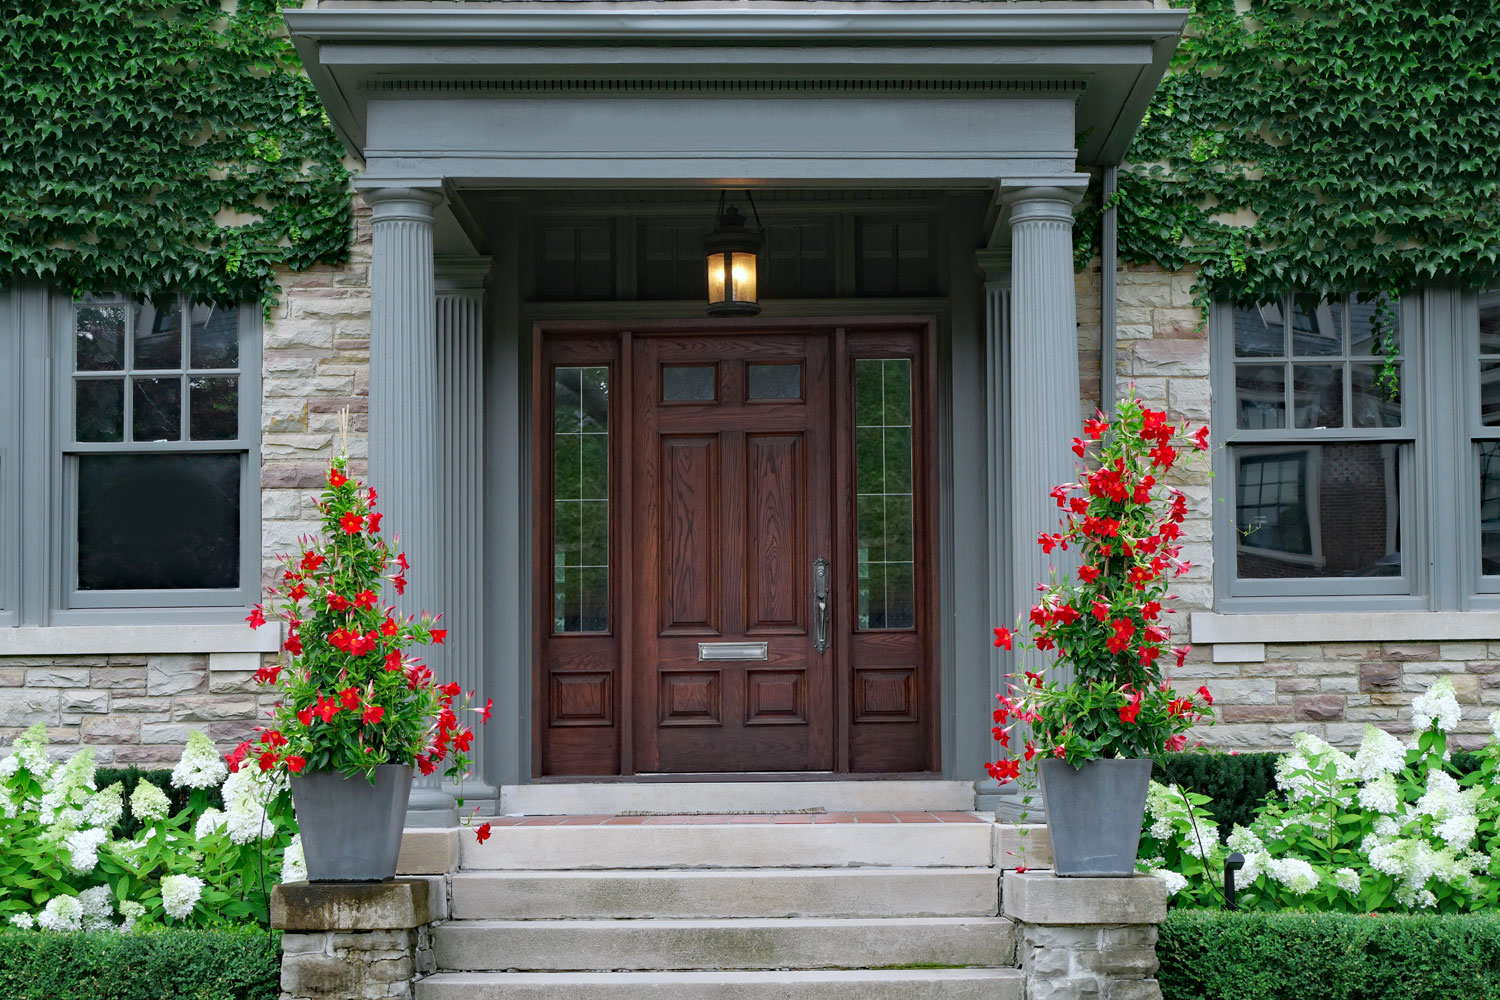 A brown hardwood front door and a gray concrete entryway